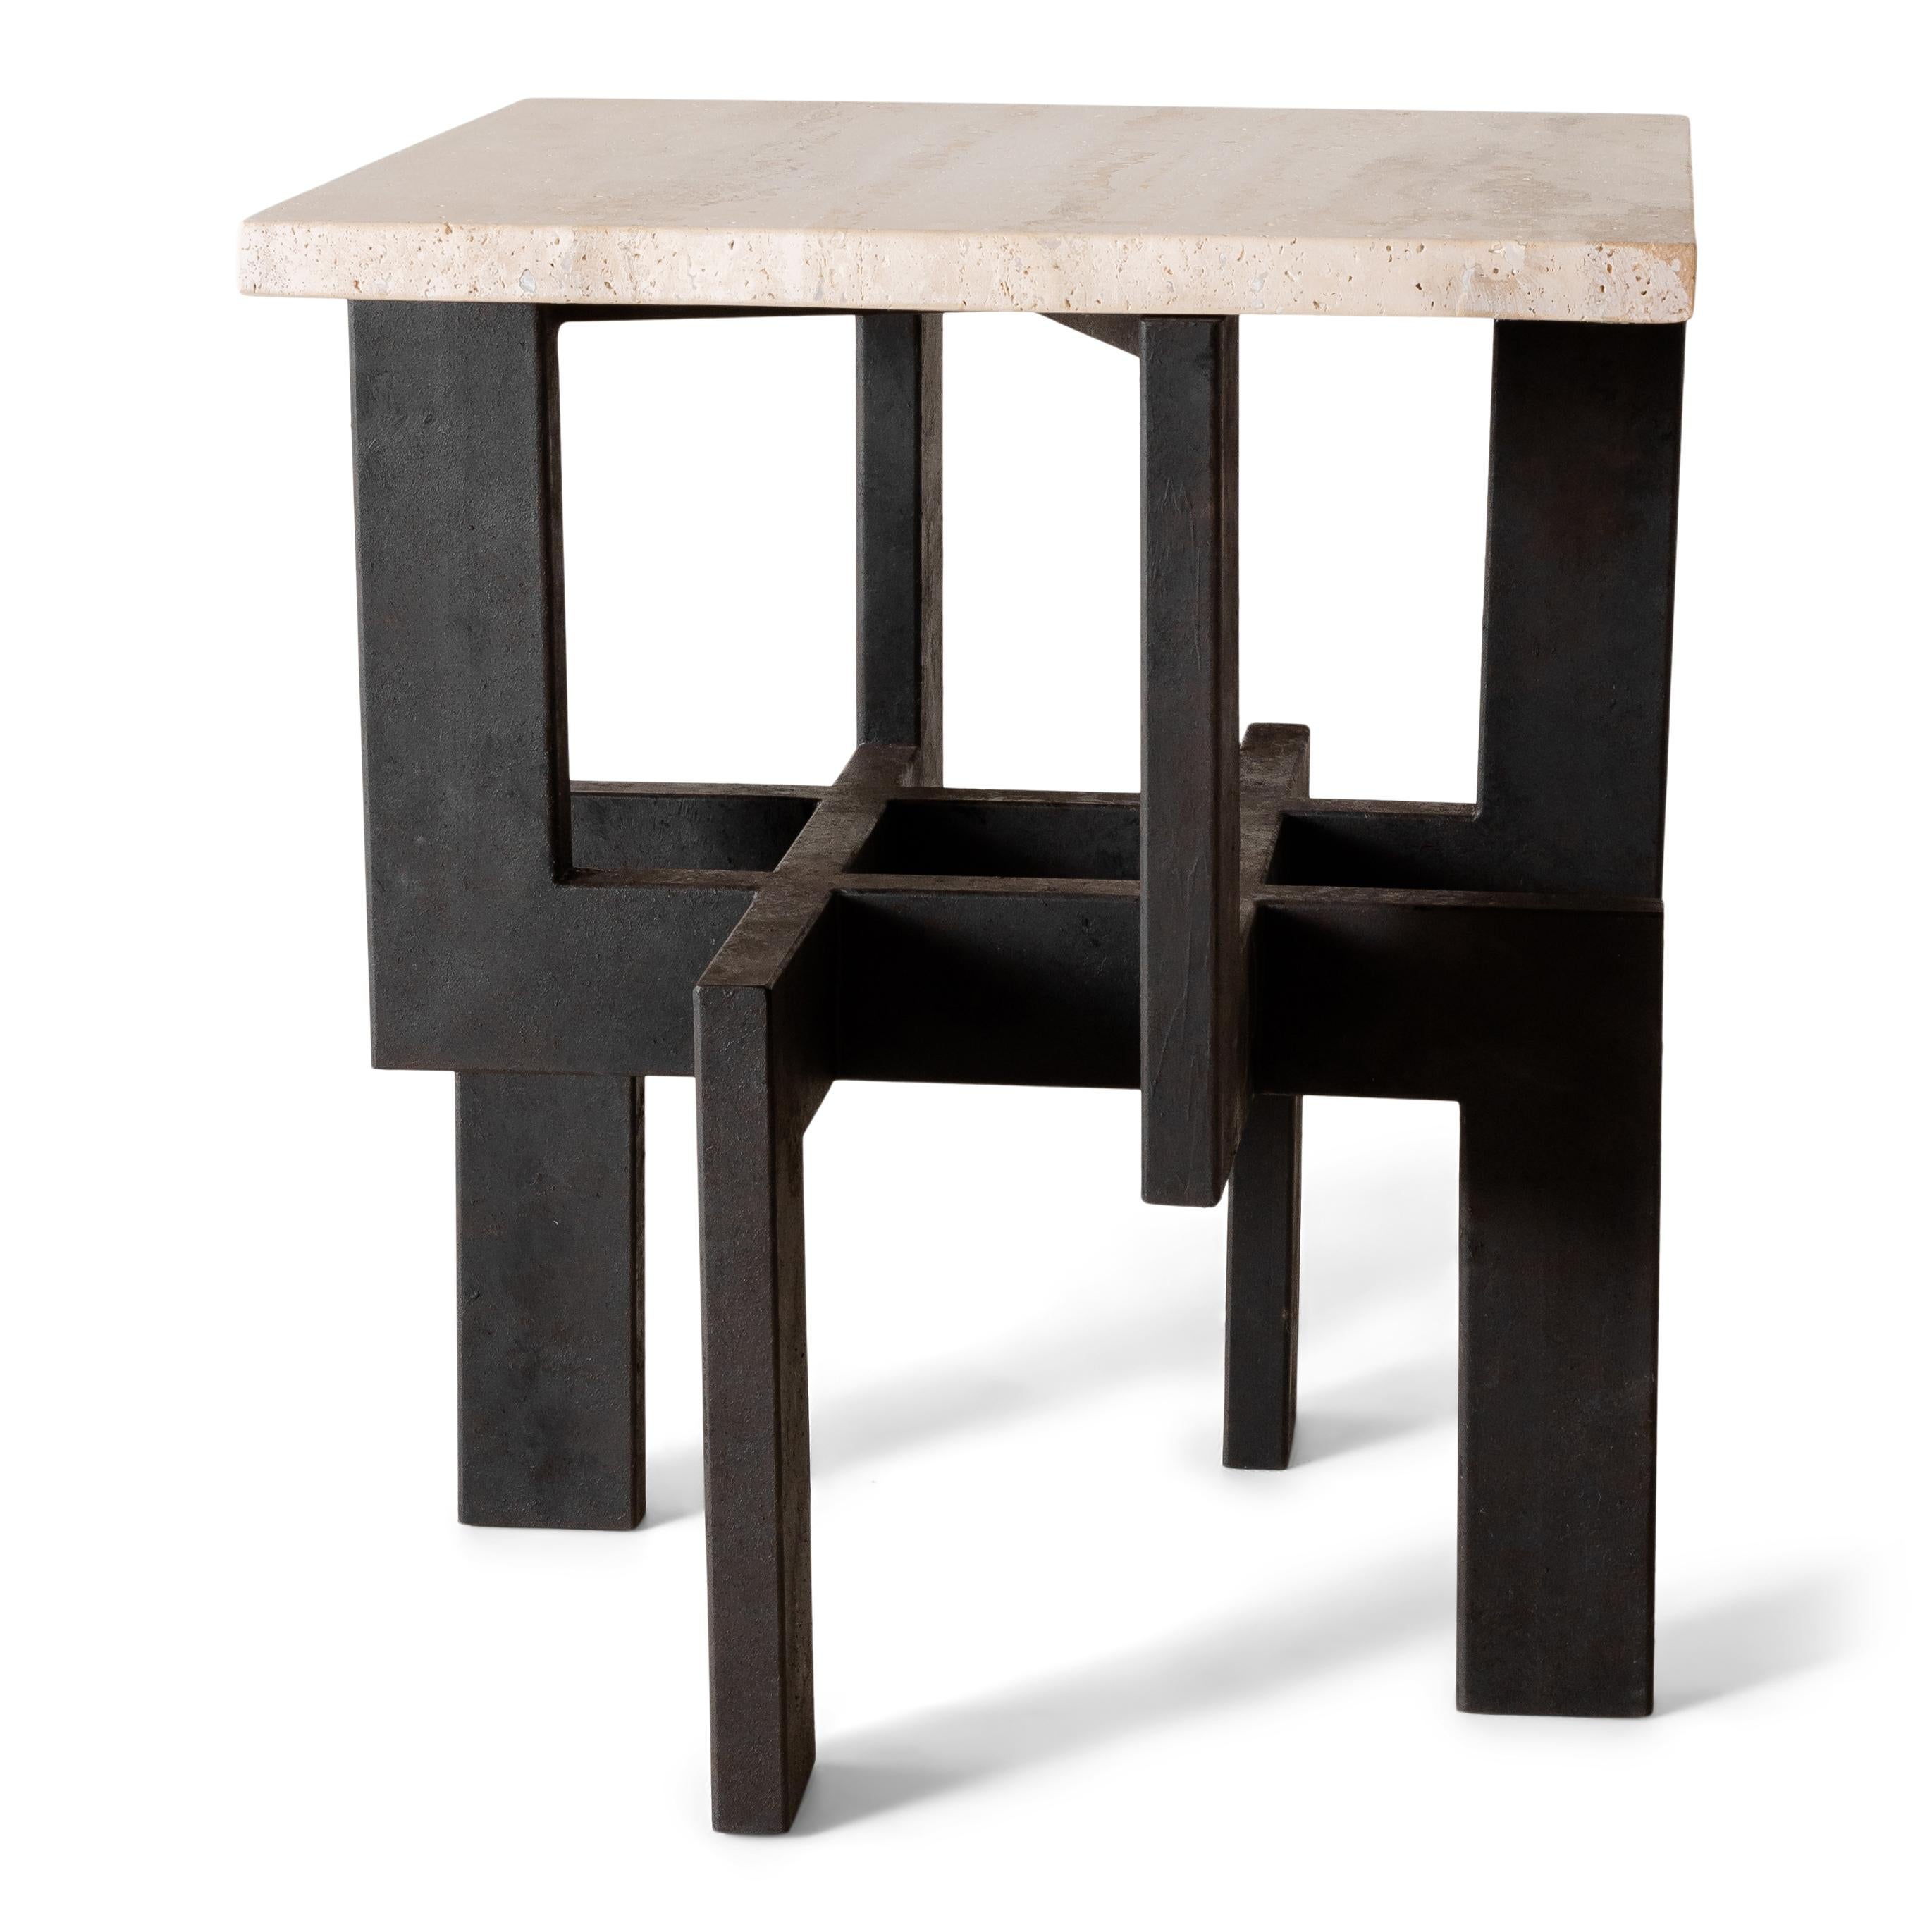 Modernist steel ebony coffee table with silver travertine top

Stone: Silver travertine honed back
Metal: Steel ebony

Designed by Brendan Bass for the Vision and Design Collection, by using high quality materials and textures. All materials are